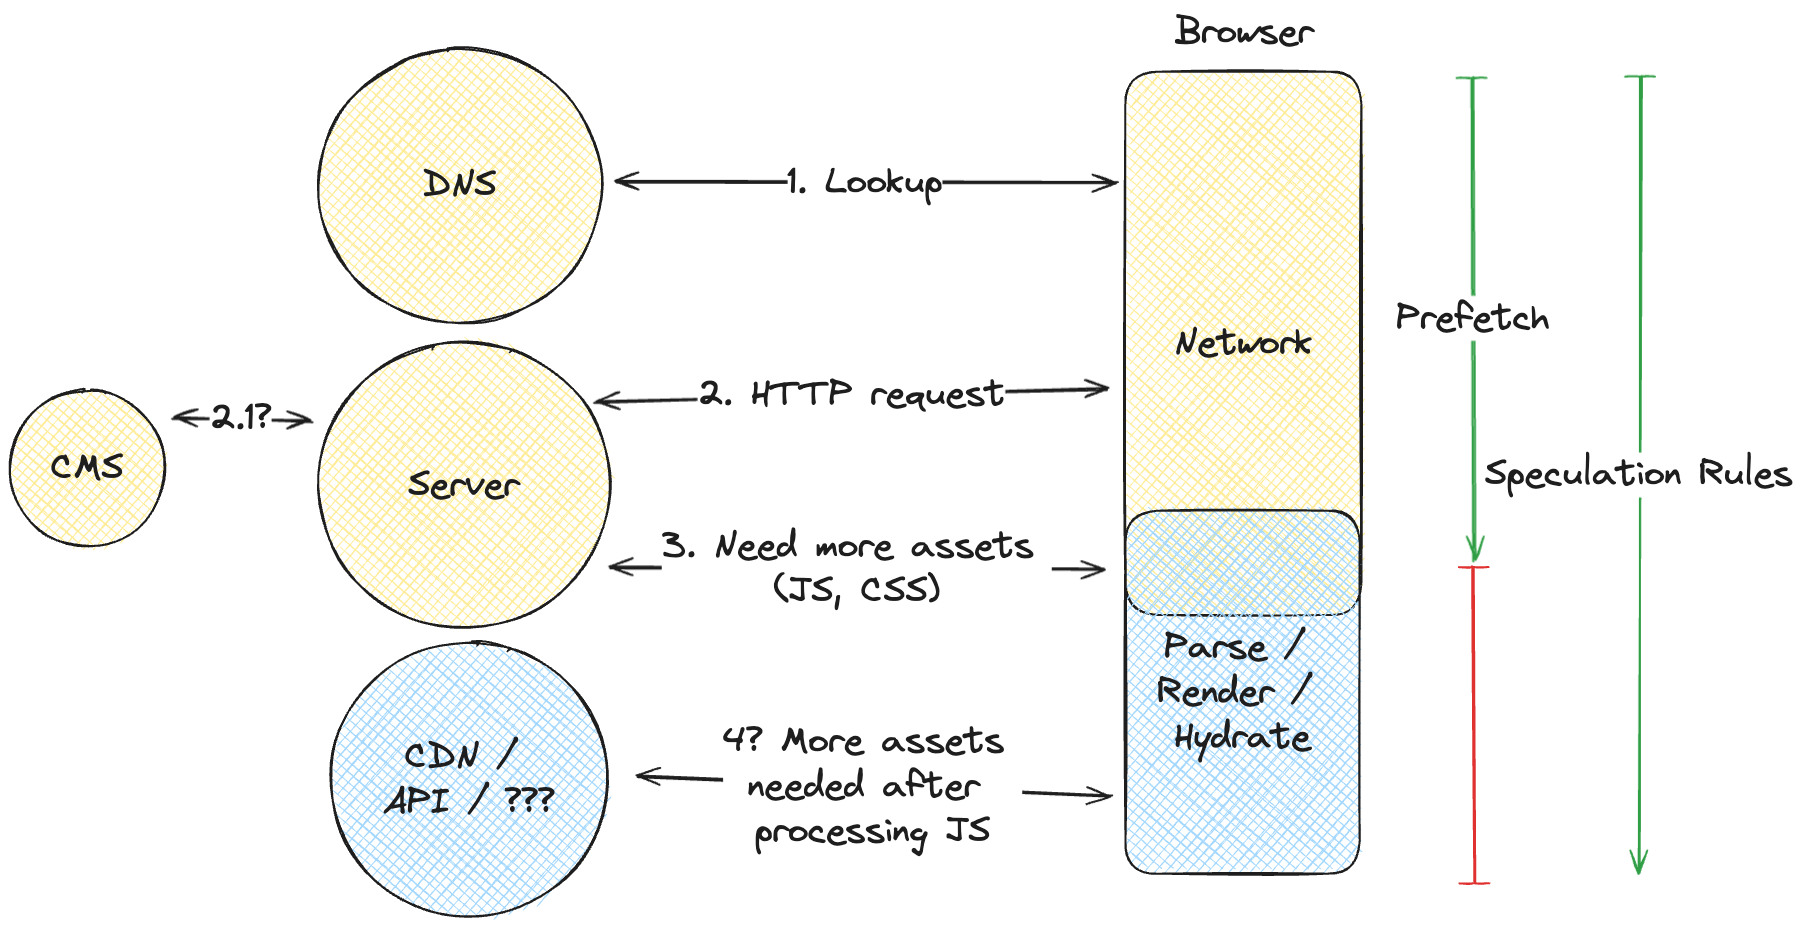 A diagram showing the steps the browser takes to load a web page. 1. Lookup, 2. HTTP Request, 2.1. Request to a CMS, 3. Requests more assets from the server, 4. Request more assets after processing JavaScript. When comparing prefetching to prerendering with the Speculation Rules API, the Speculation Rules API cover all 4 steps while prefetching stops at step 3. Prefetching does not run the client side JS.